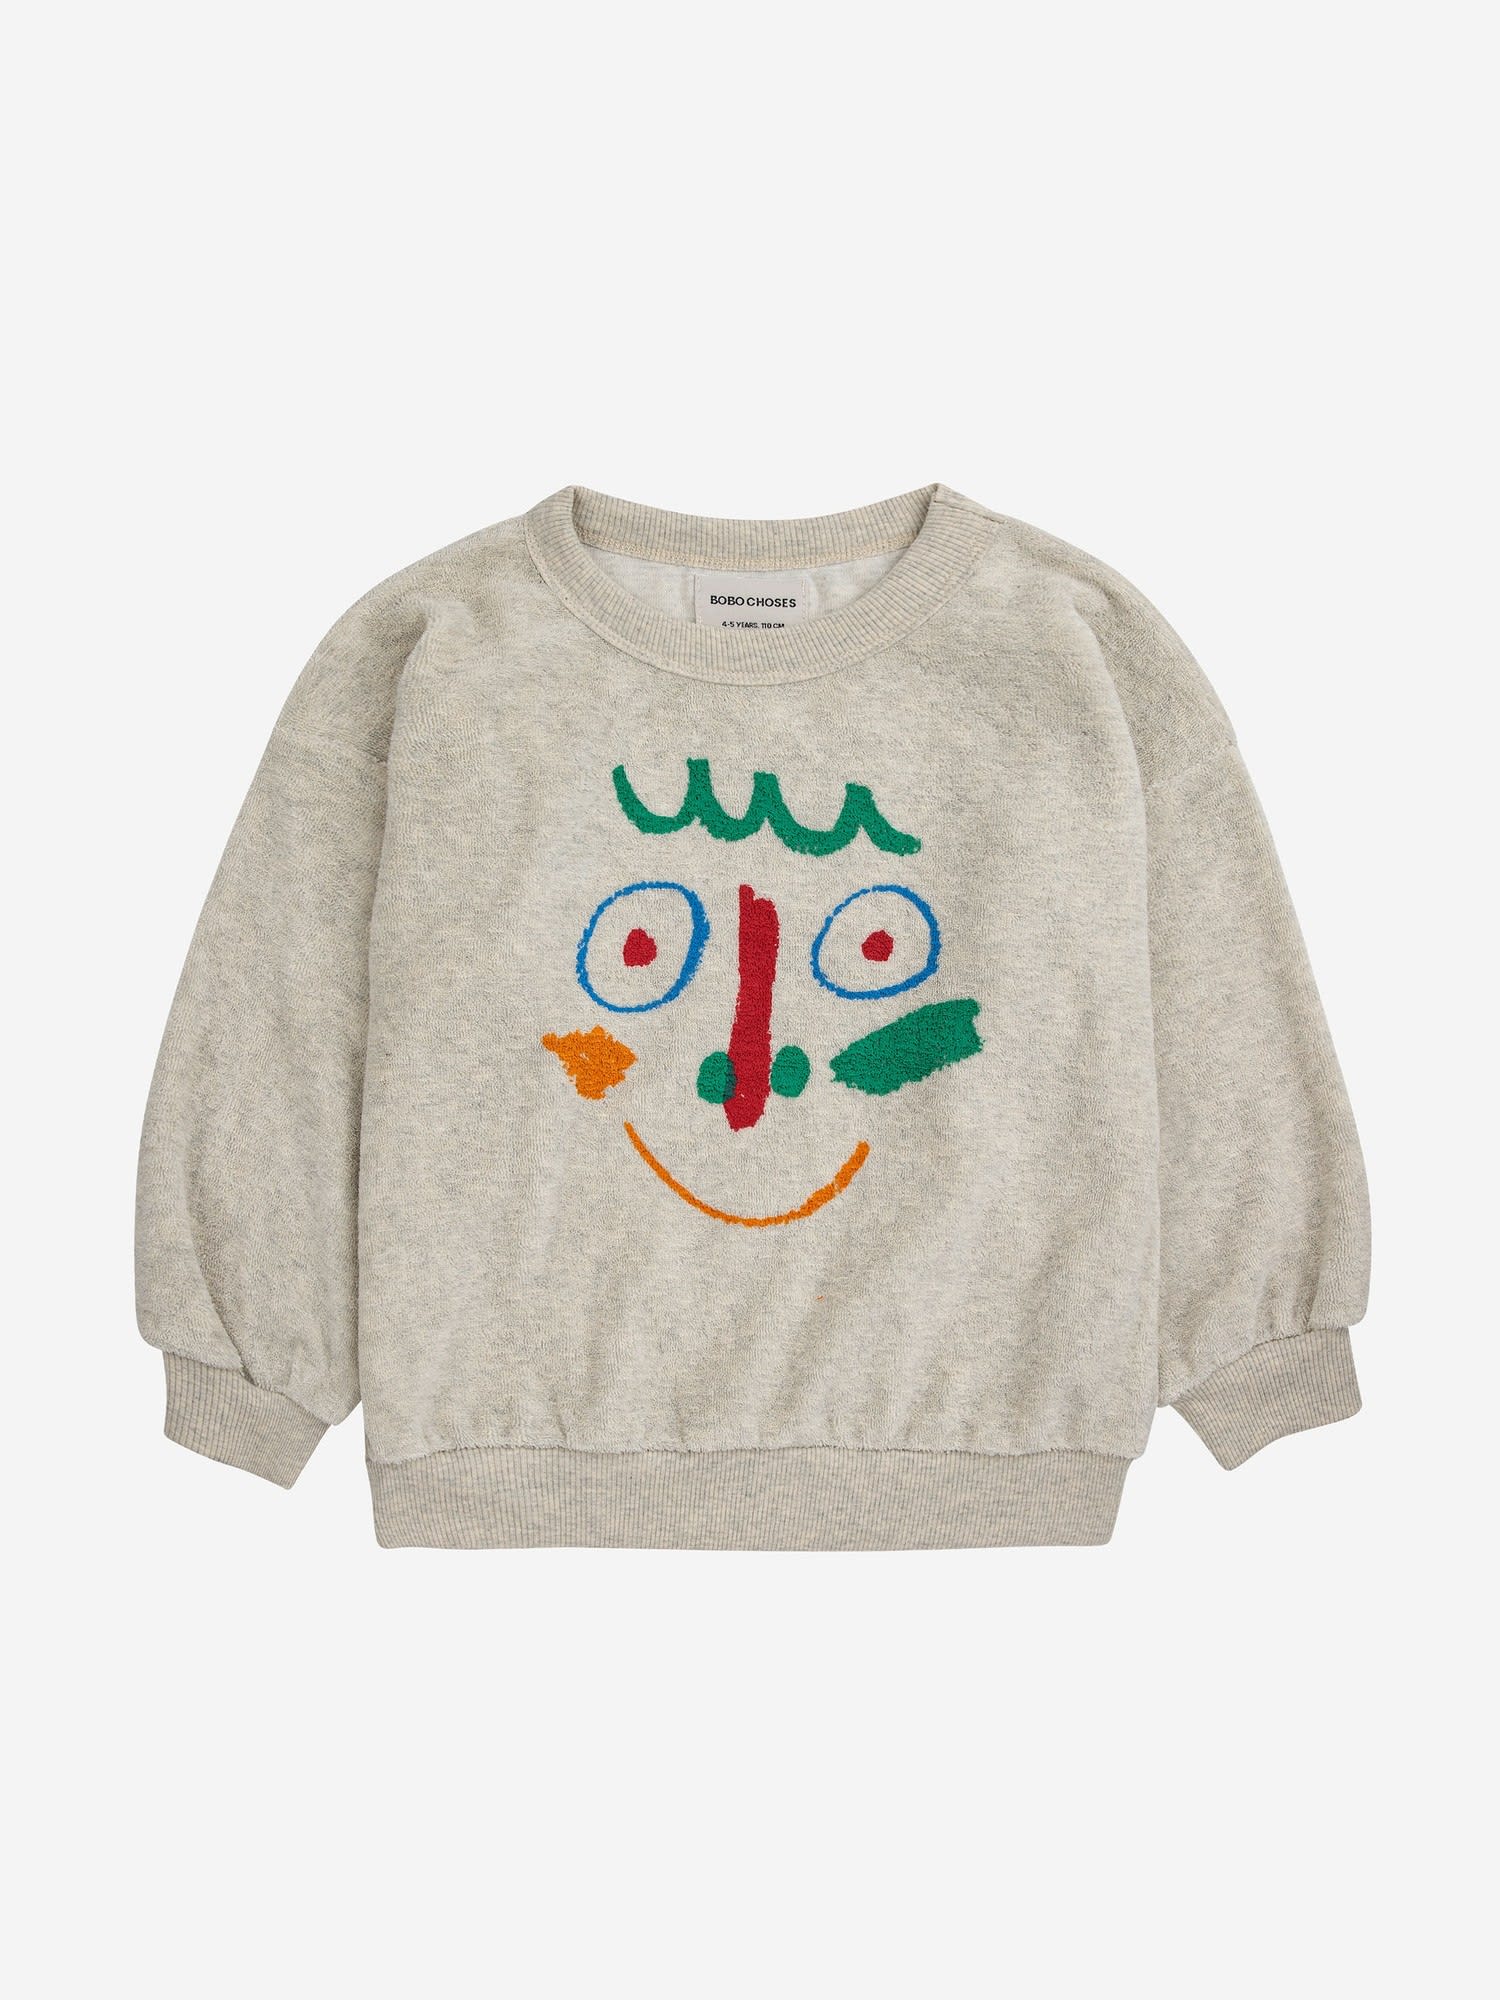 BOBO CHOSES GRAY SWEATSHIRT FOR KIDS WITH MULTICOLORED FACE PATTERN